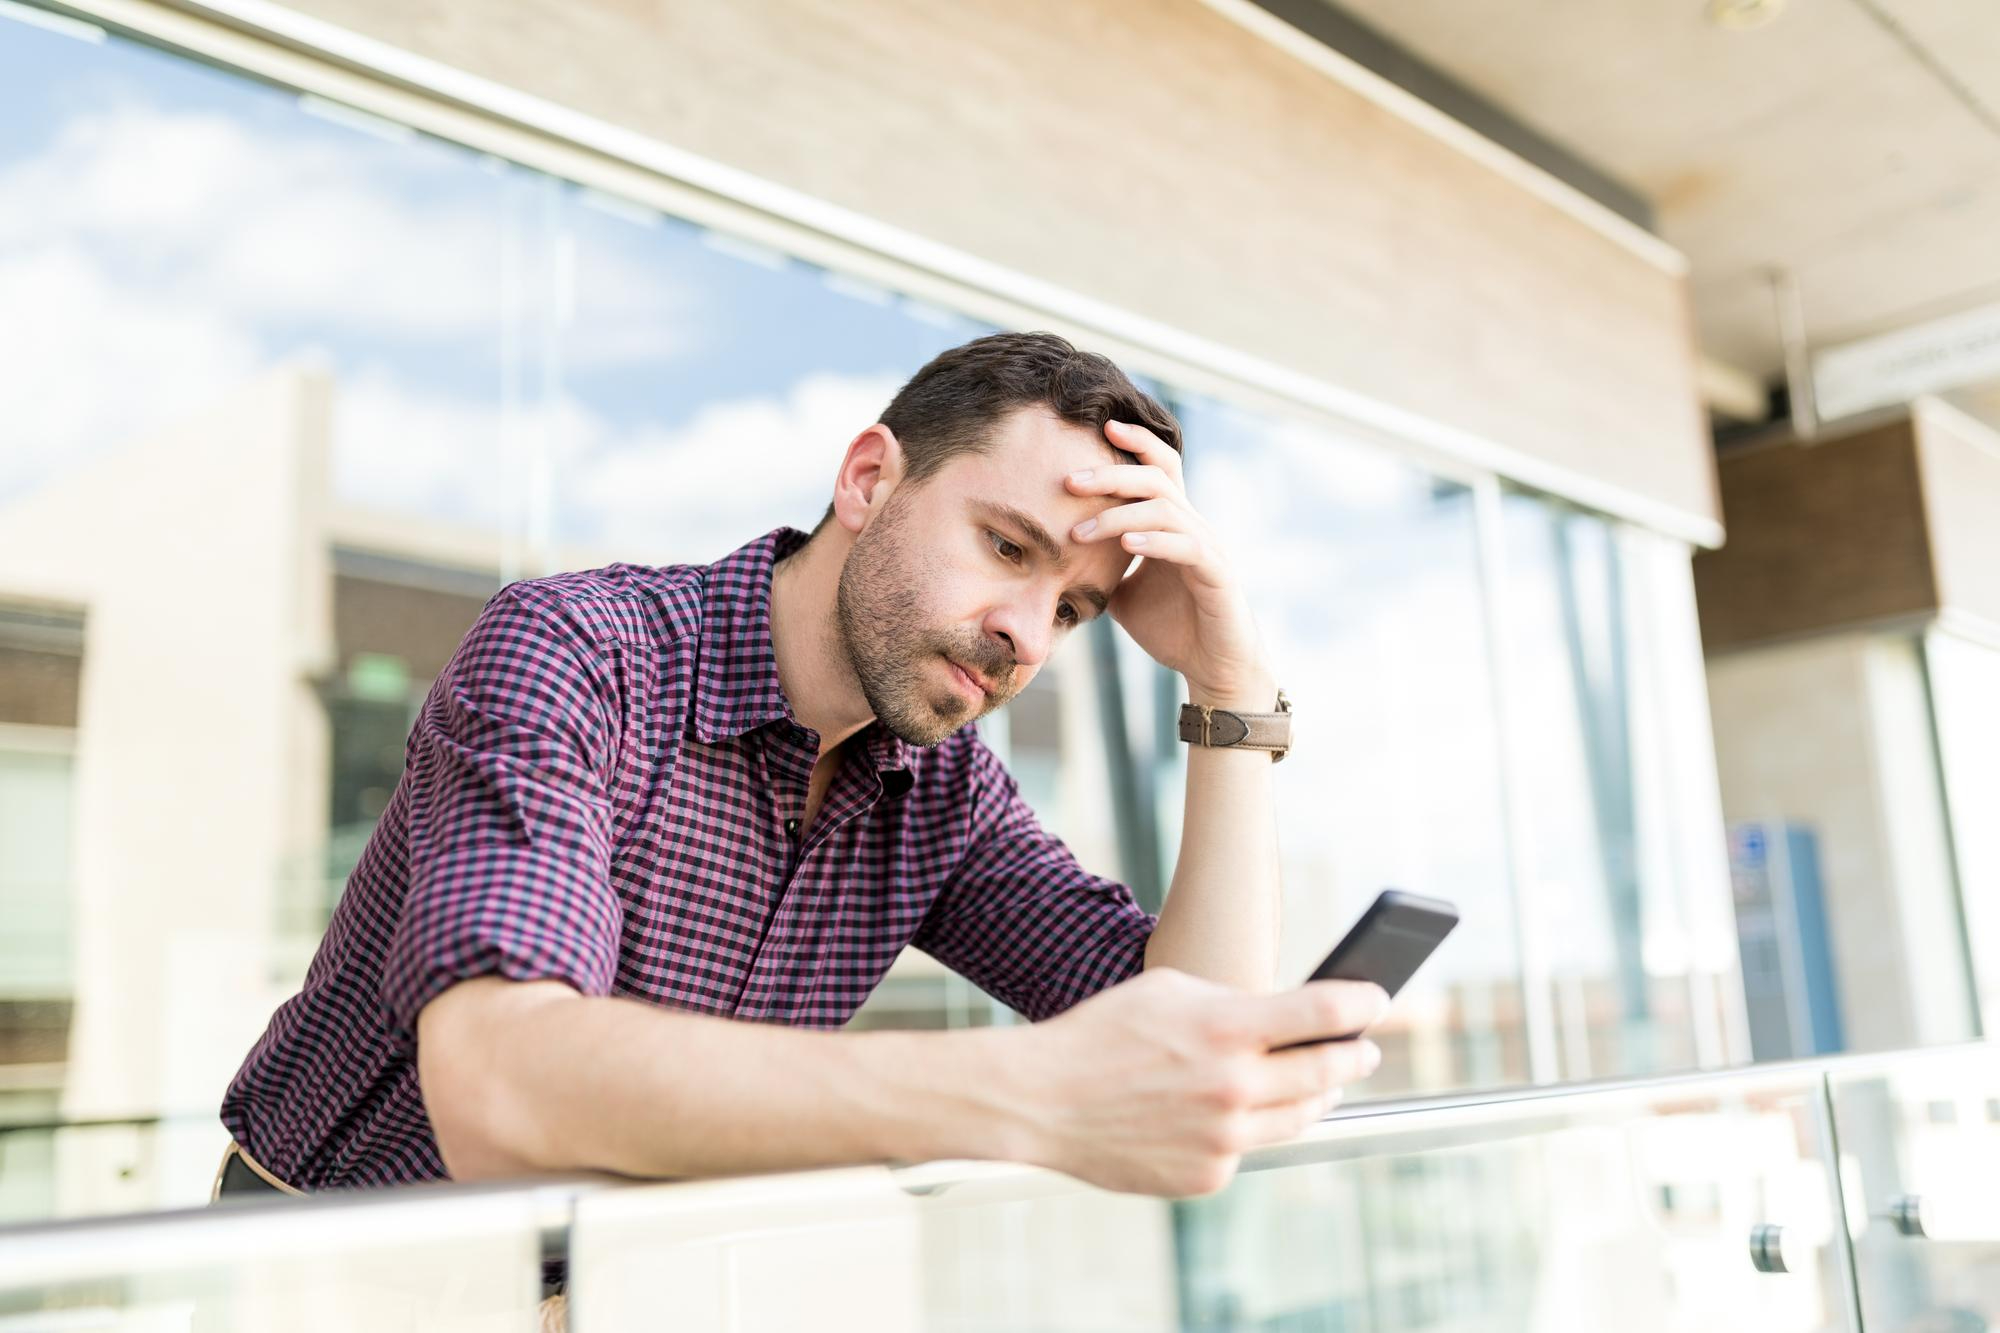 An upset man standing over a balcony looking at his phone | Source: Freepik